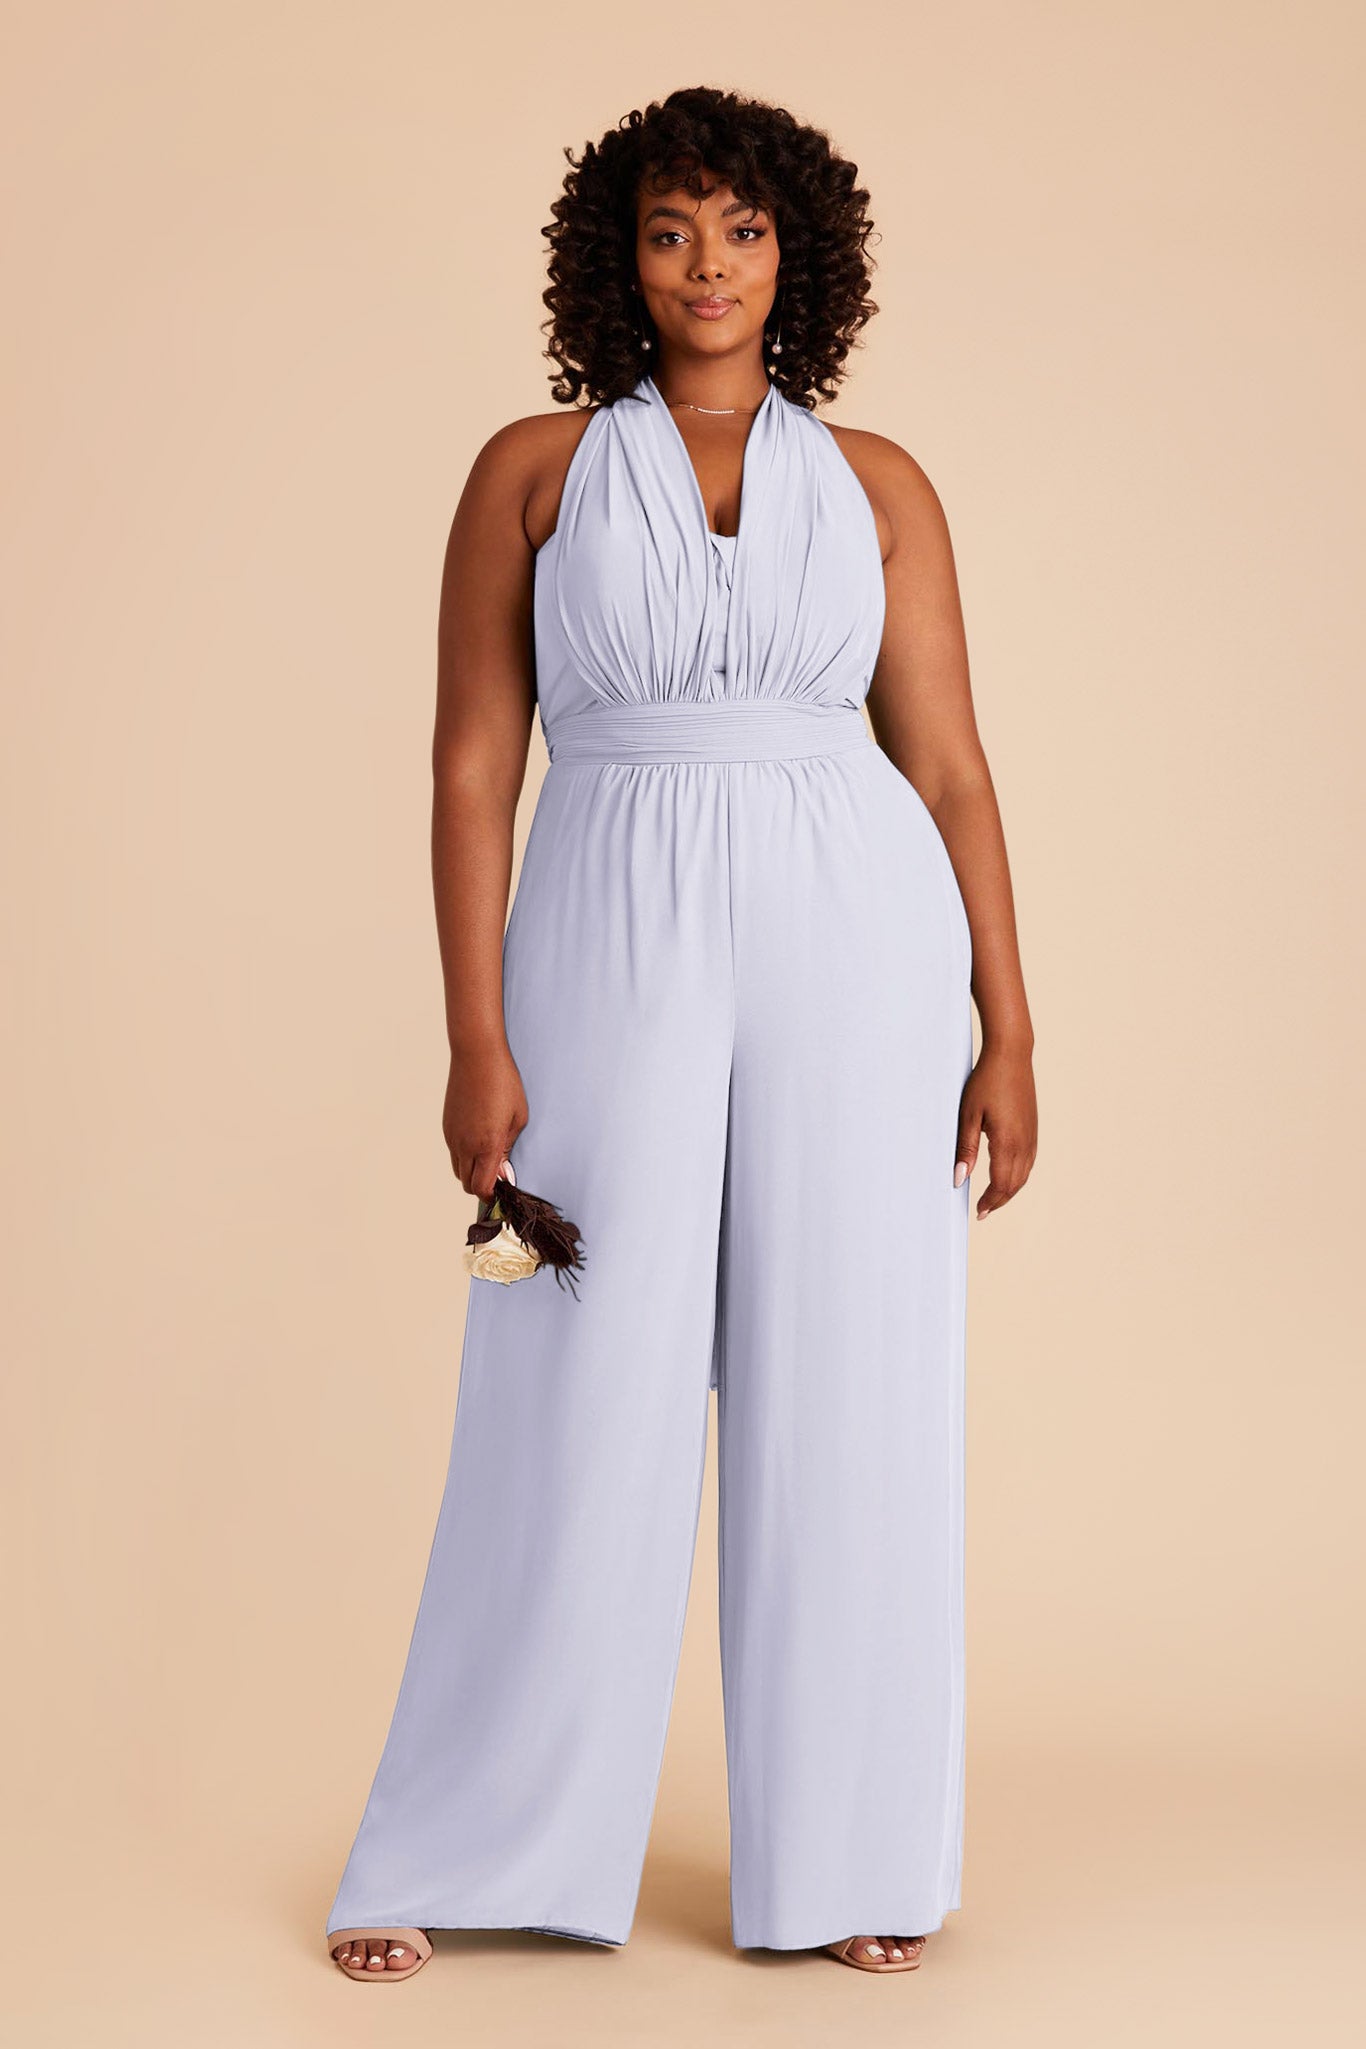 Periwinkle Blue Gigi Convertible Jumpsuit by Birdy Grey